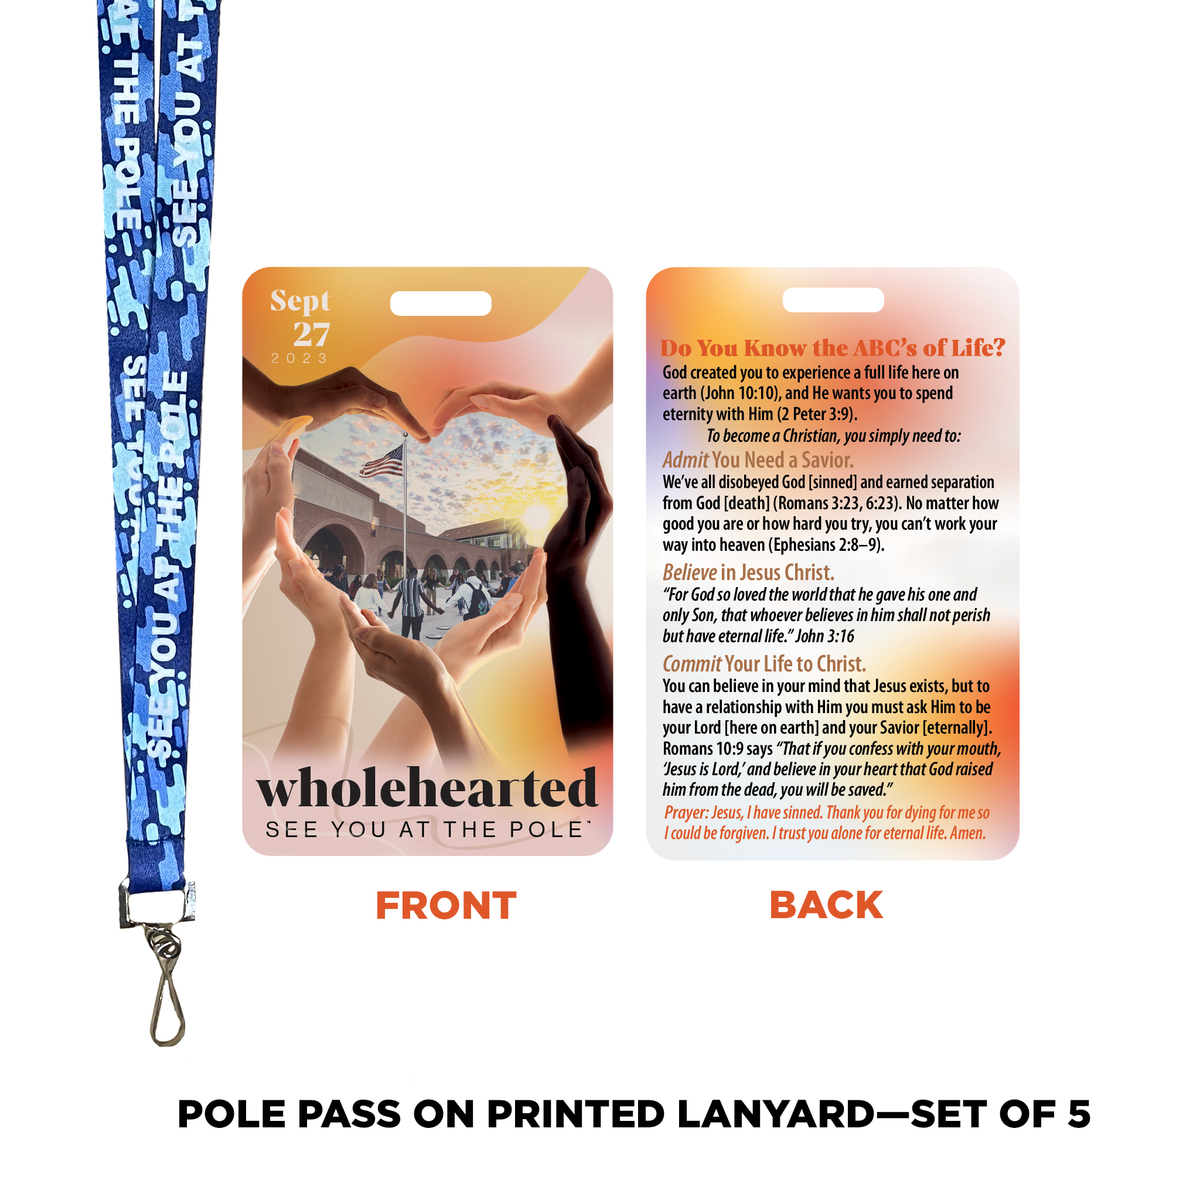 Printed Lanyard with Pole Pass (set of 5)